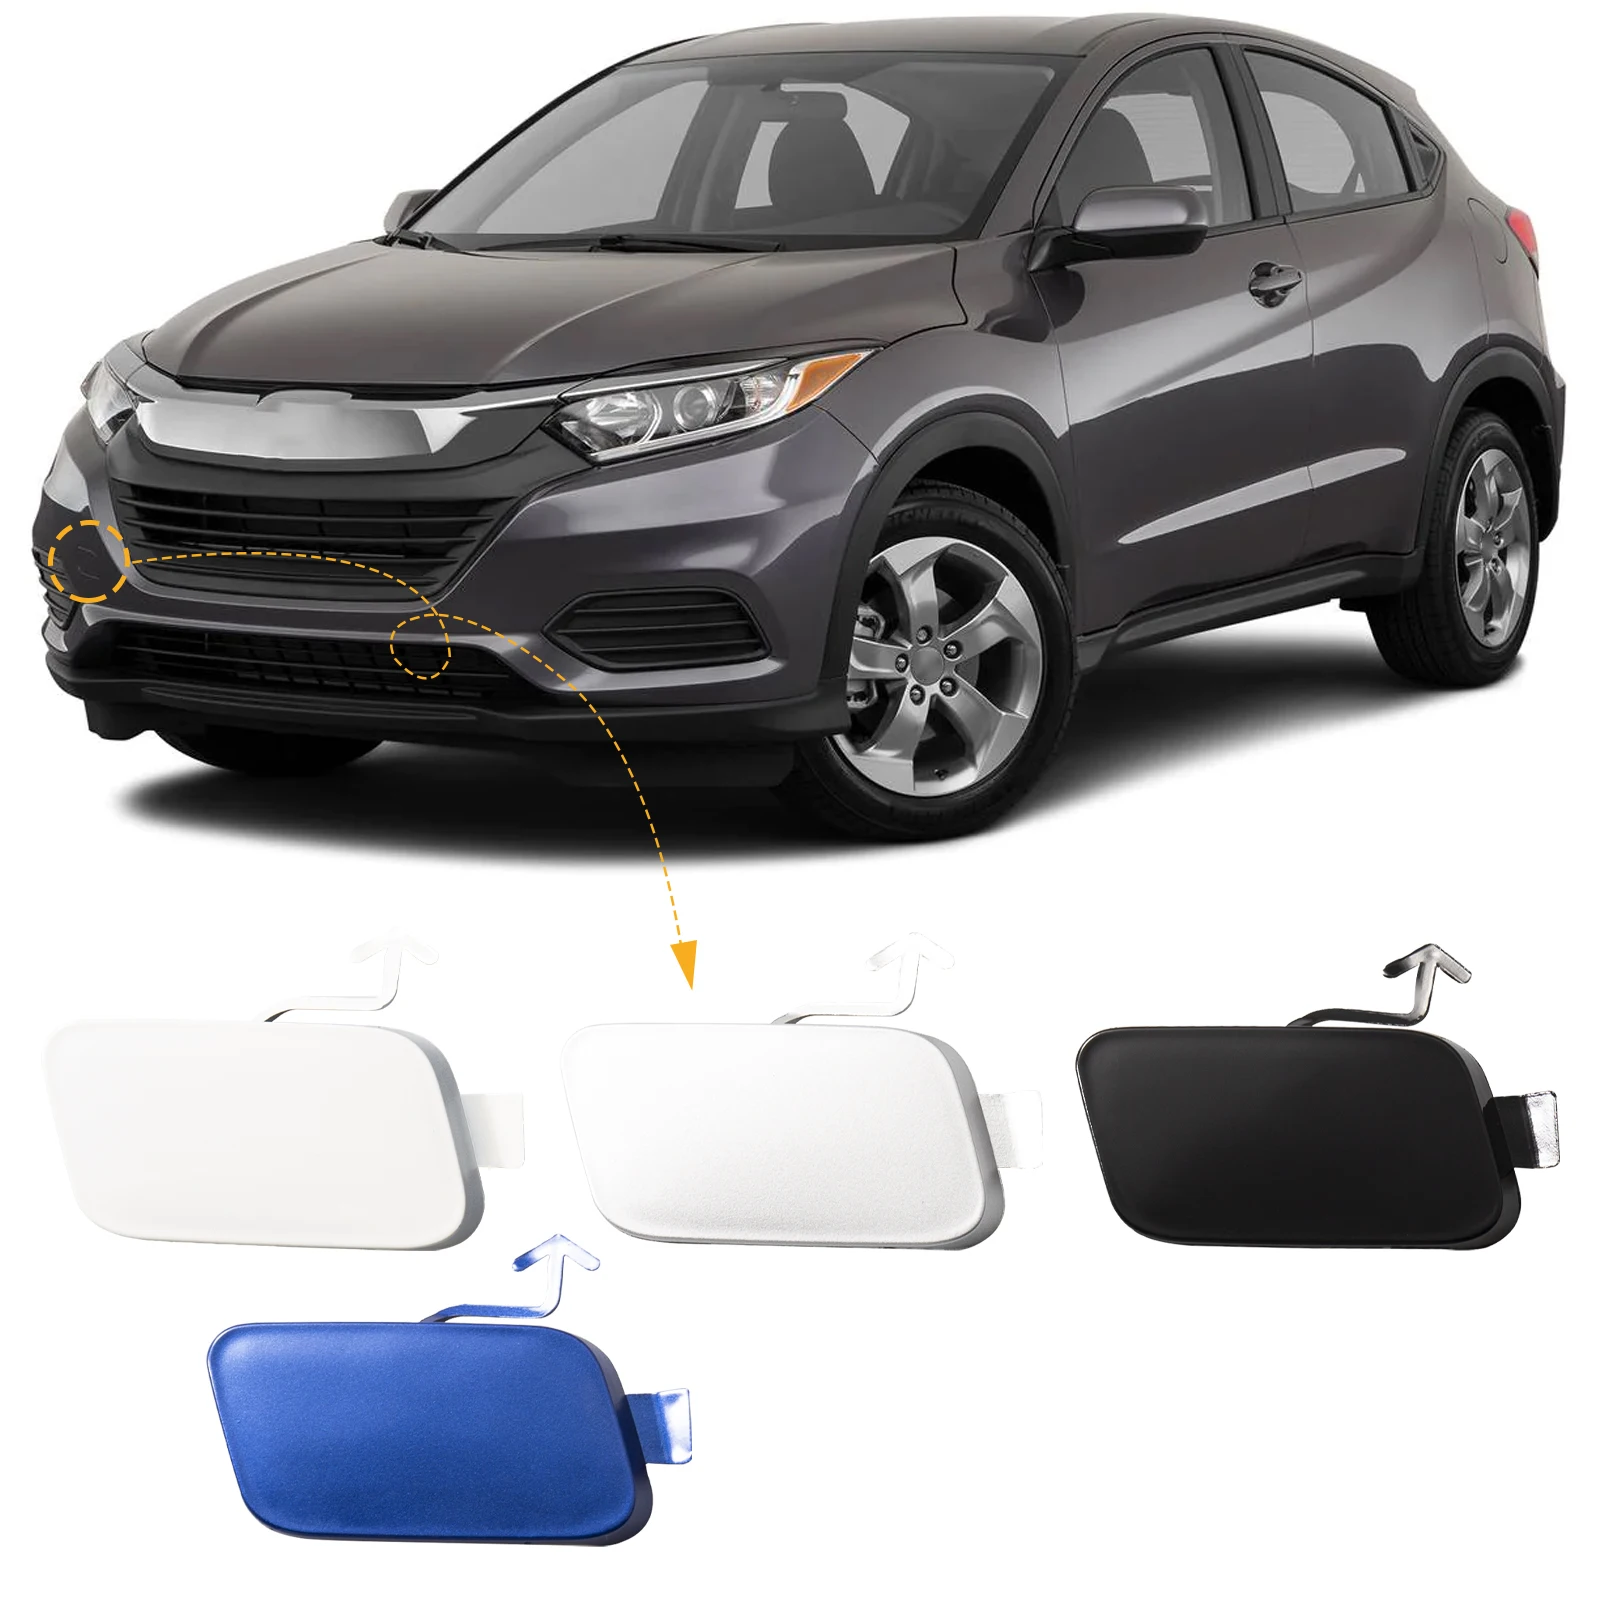 Front Bumper Tow Hook Cap Towing Eye Cover For Honda HR-V 2019-2021 - $15.75+